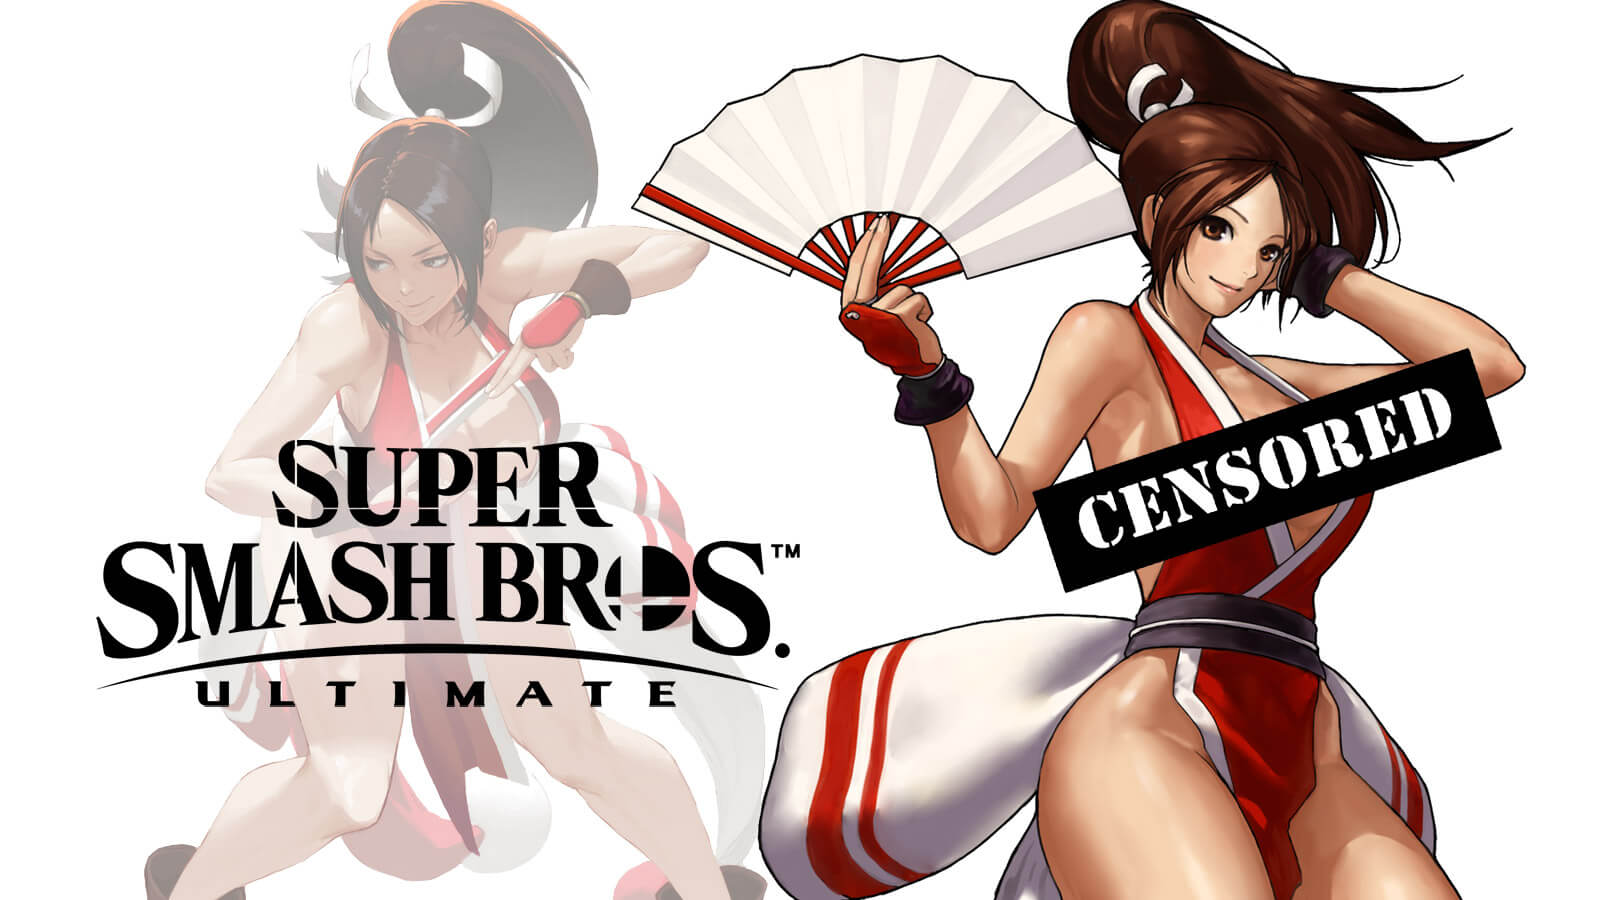 Mai From 'Fatal Fury' Is Too Sexy for 'Super Smash Bros. Ultimate